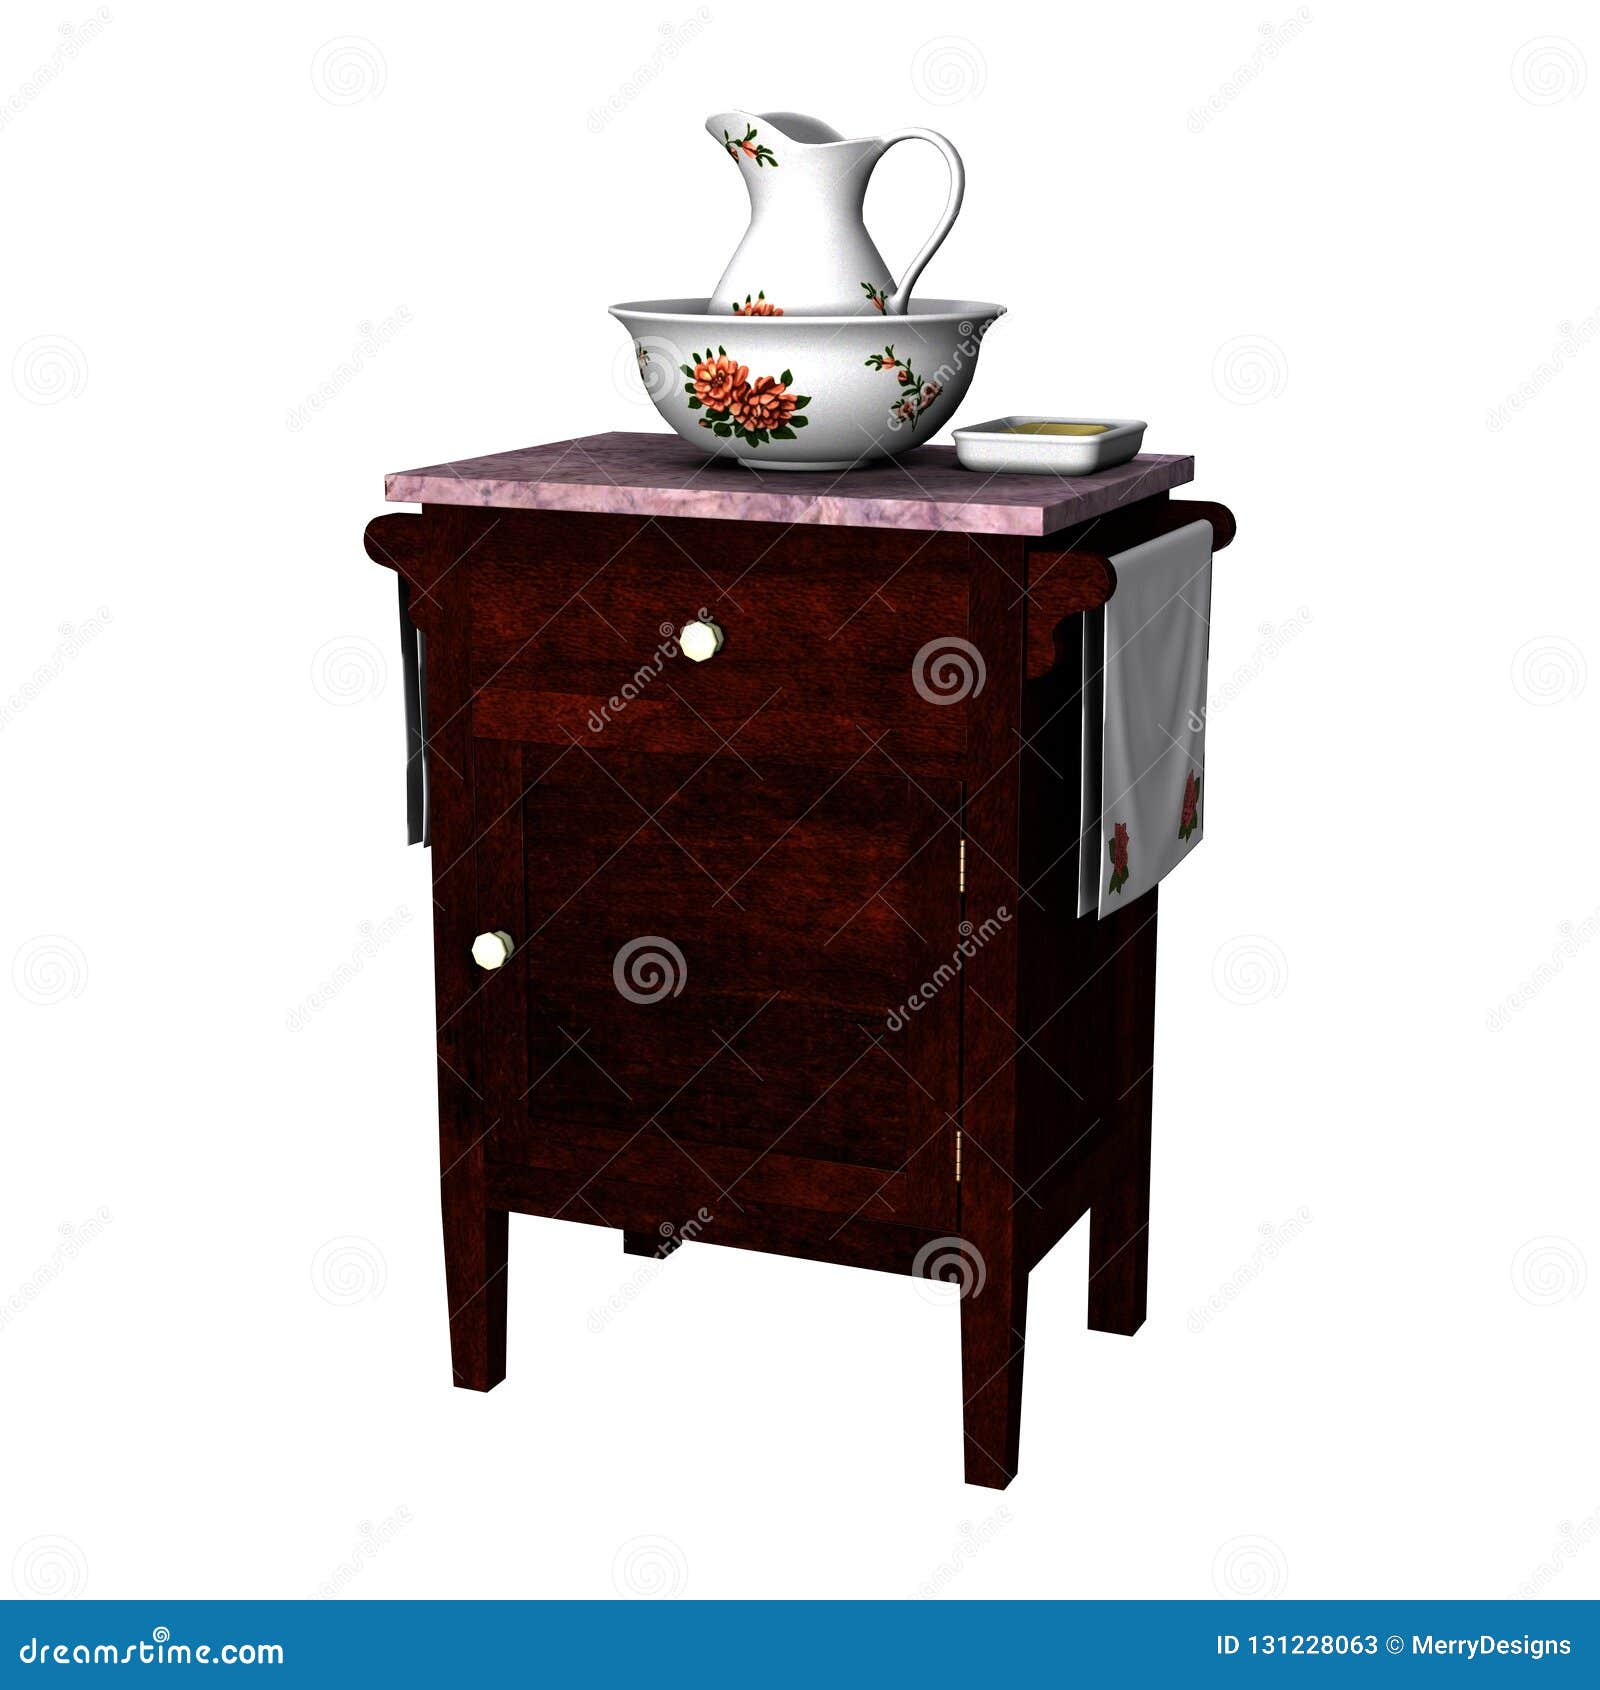 Vintage Washstand With Jug And Bowl Isolated Stock Image